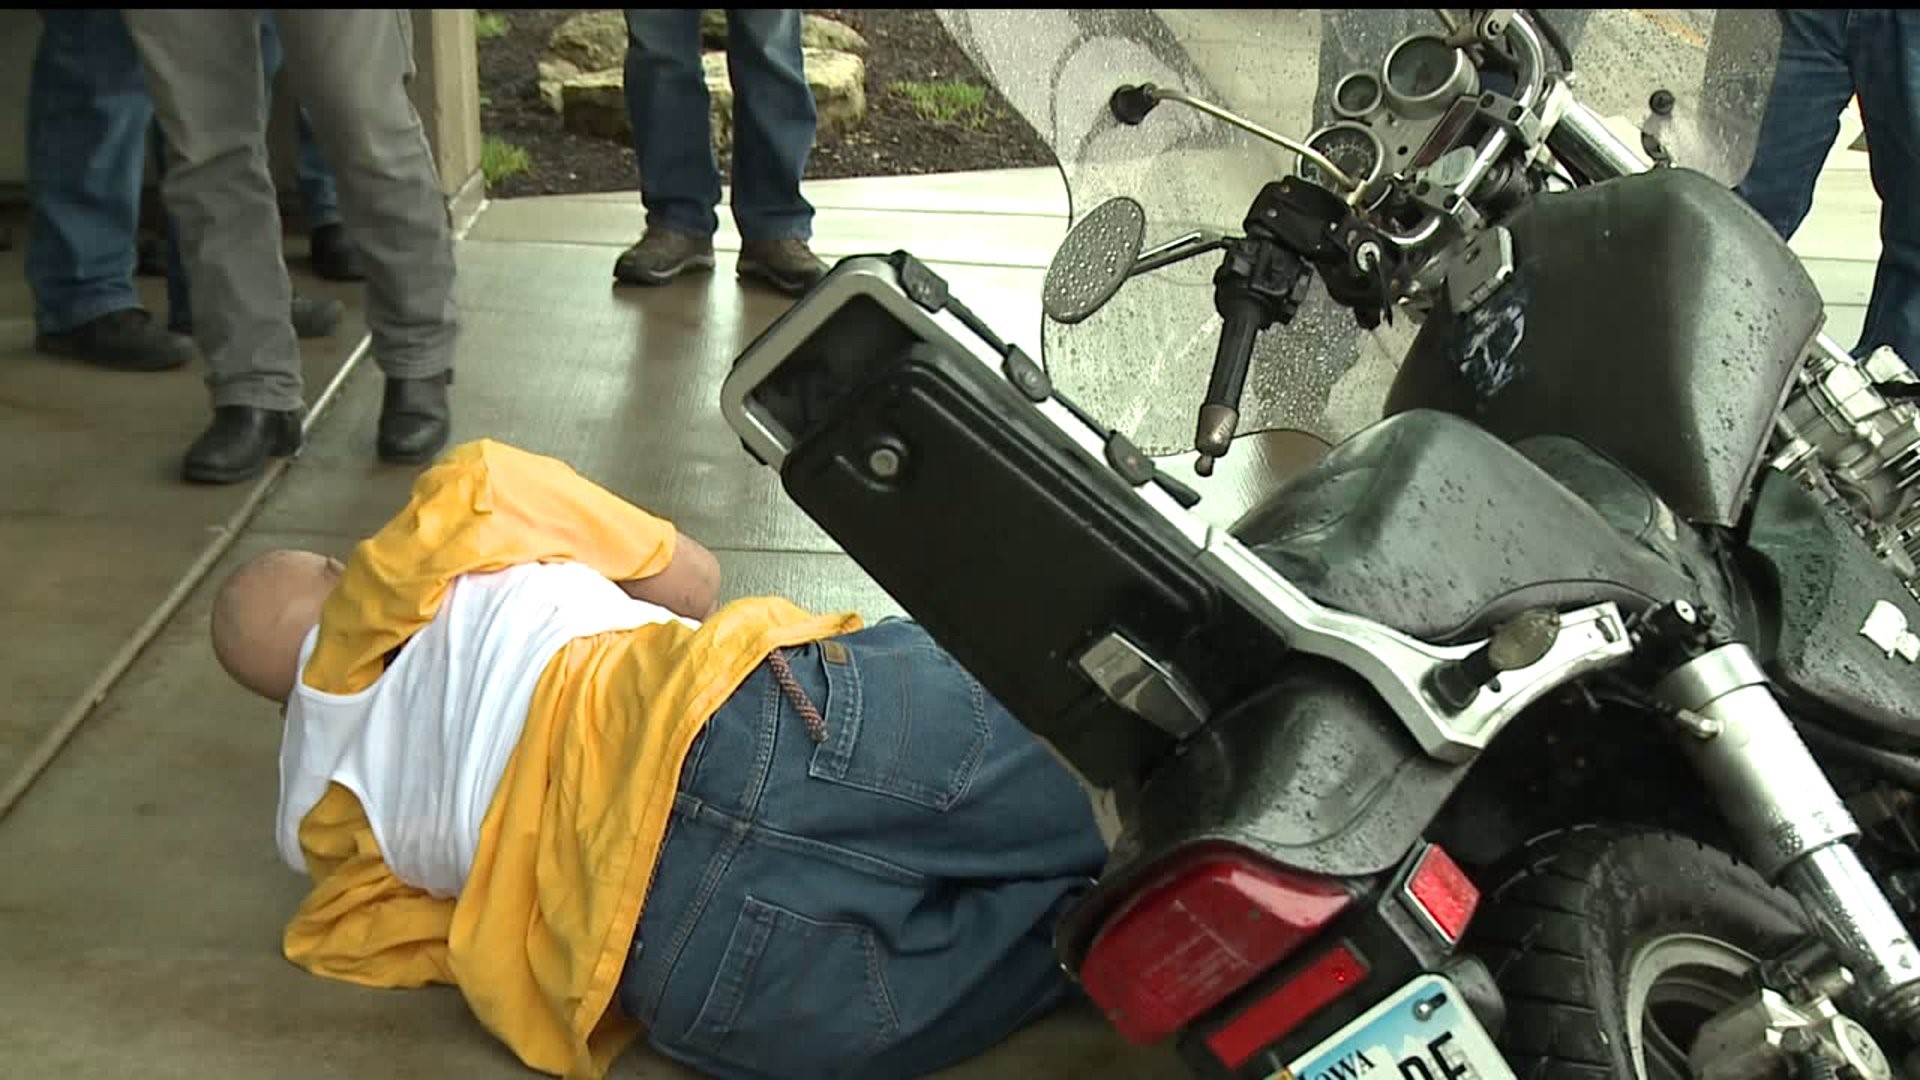 Program aims to prepare emergency responders in motorcycle accidents